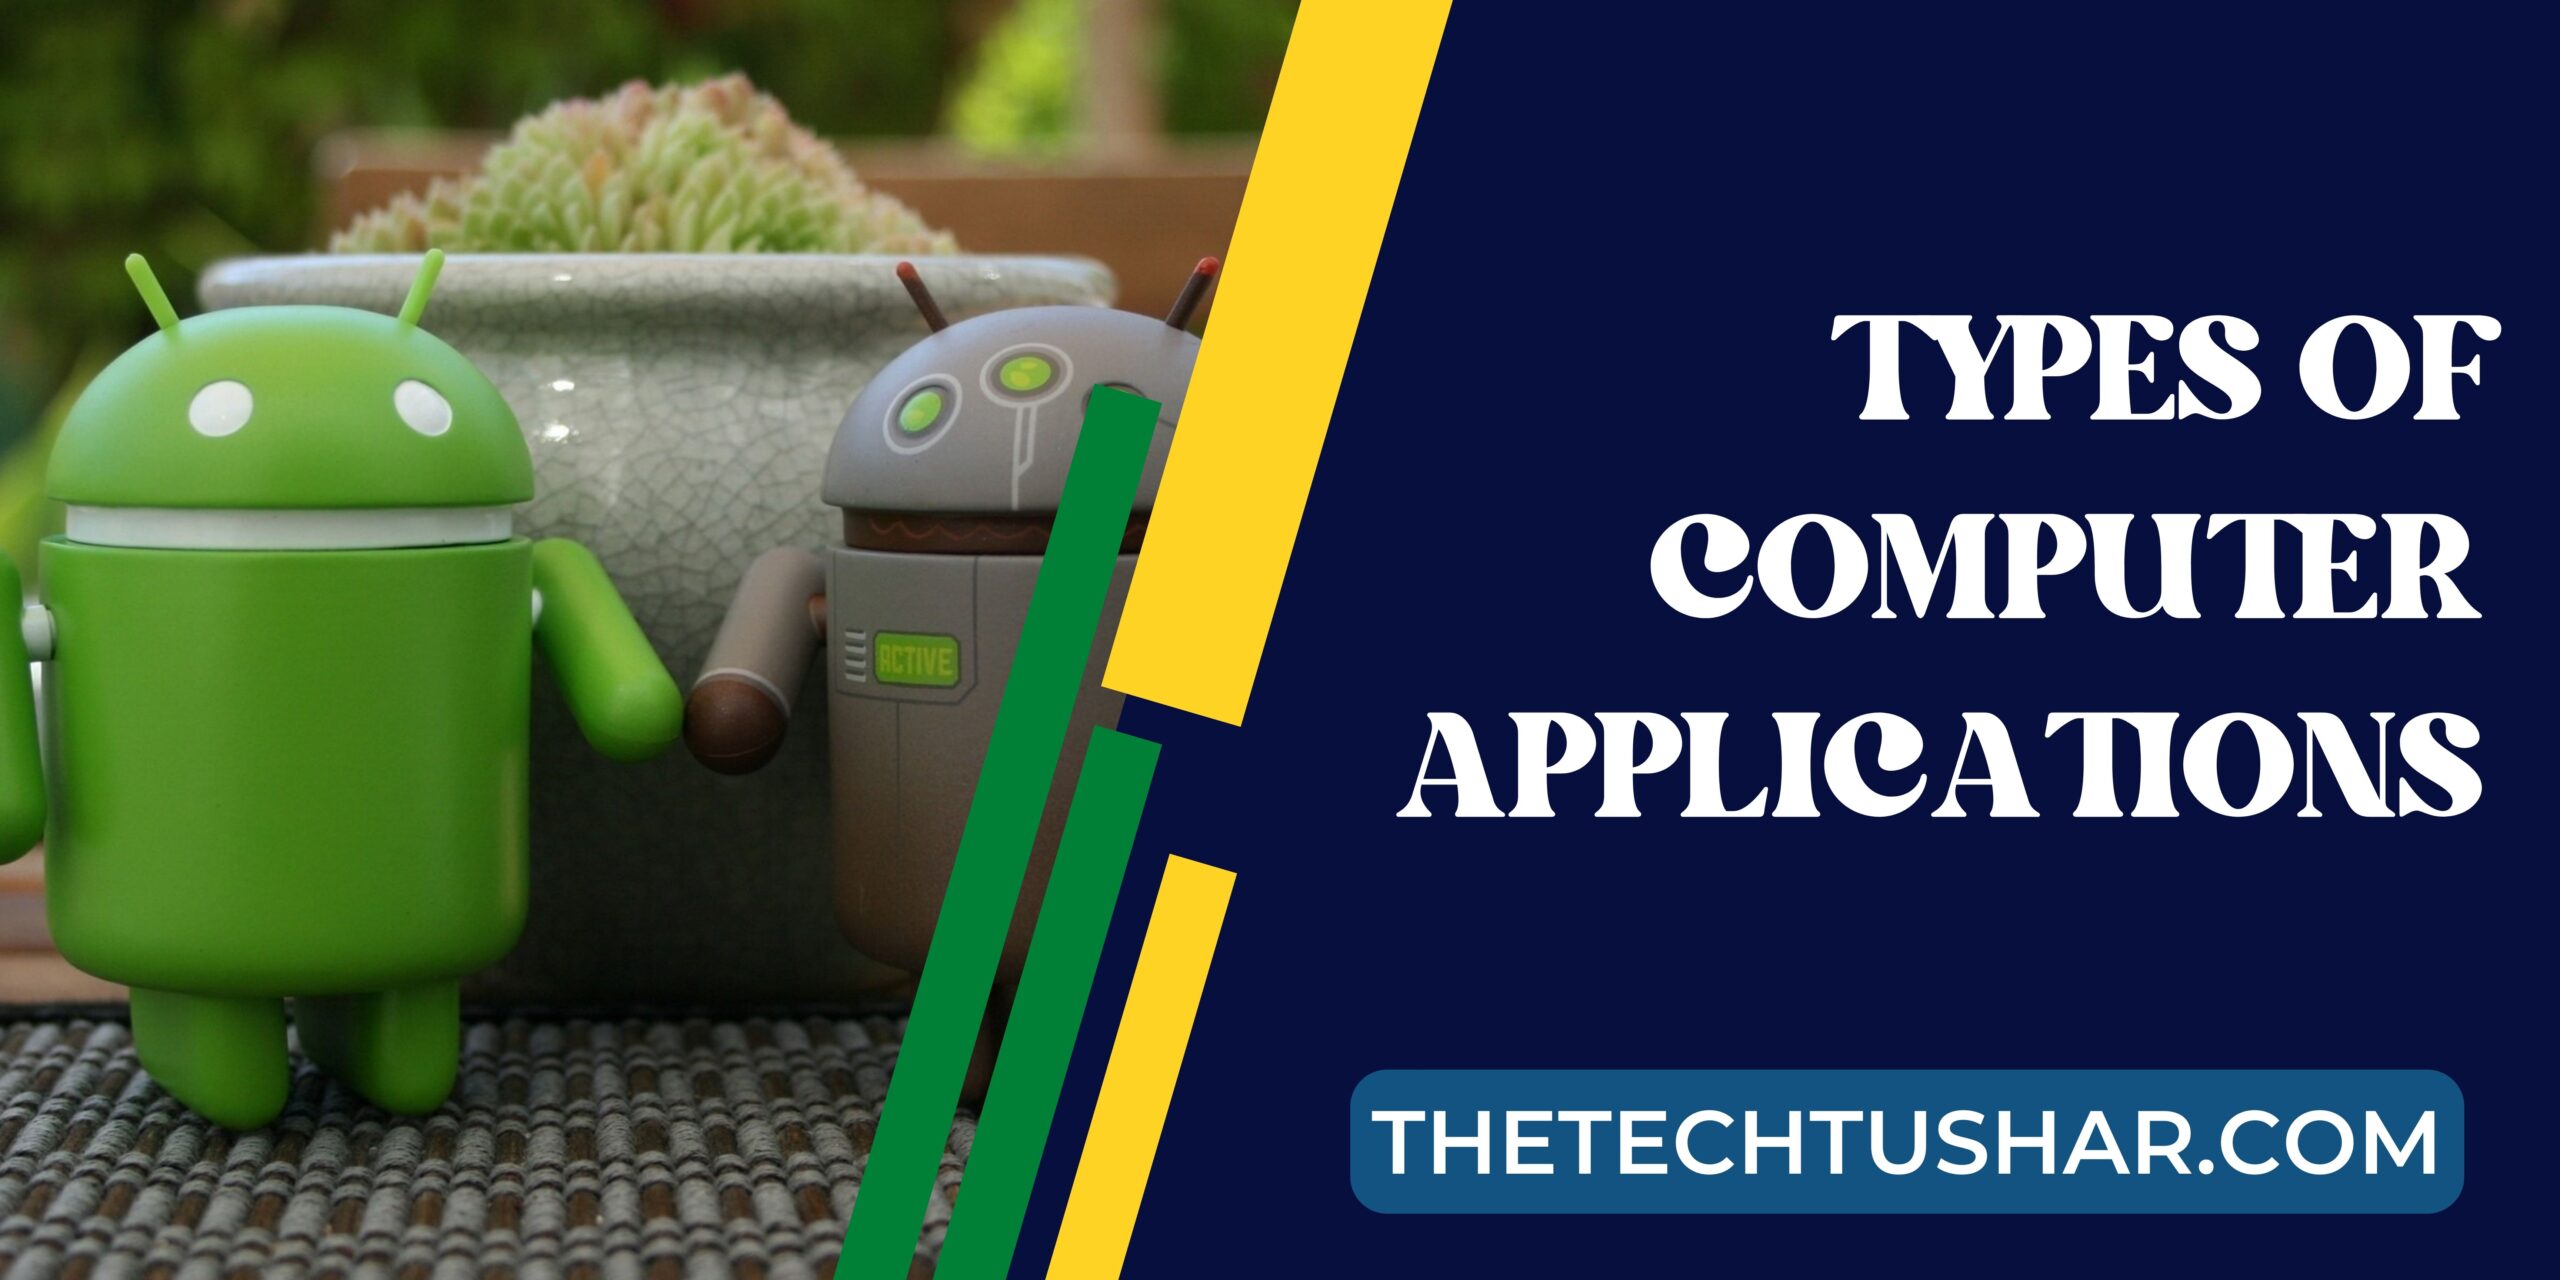 Types Of Computer Applications|Types Of Computer Applications|Tushar|Thetechtushar